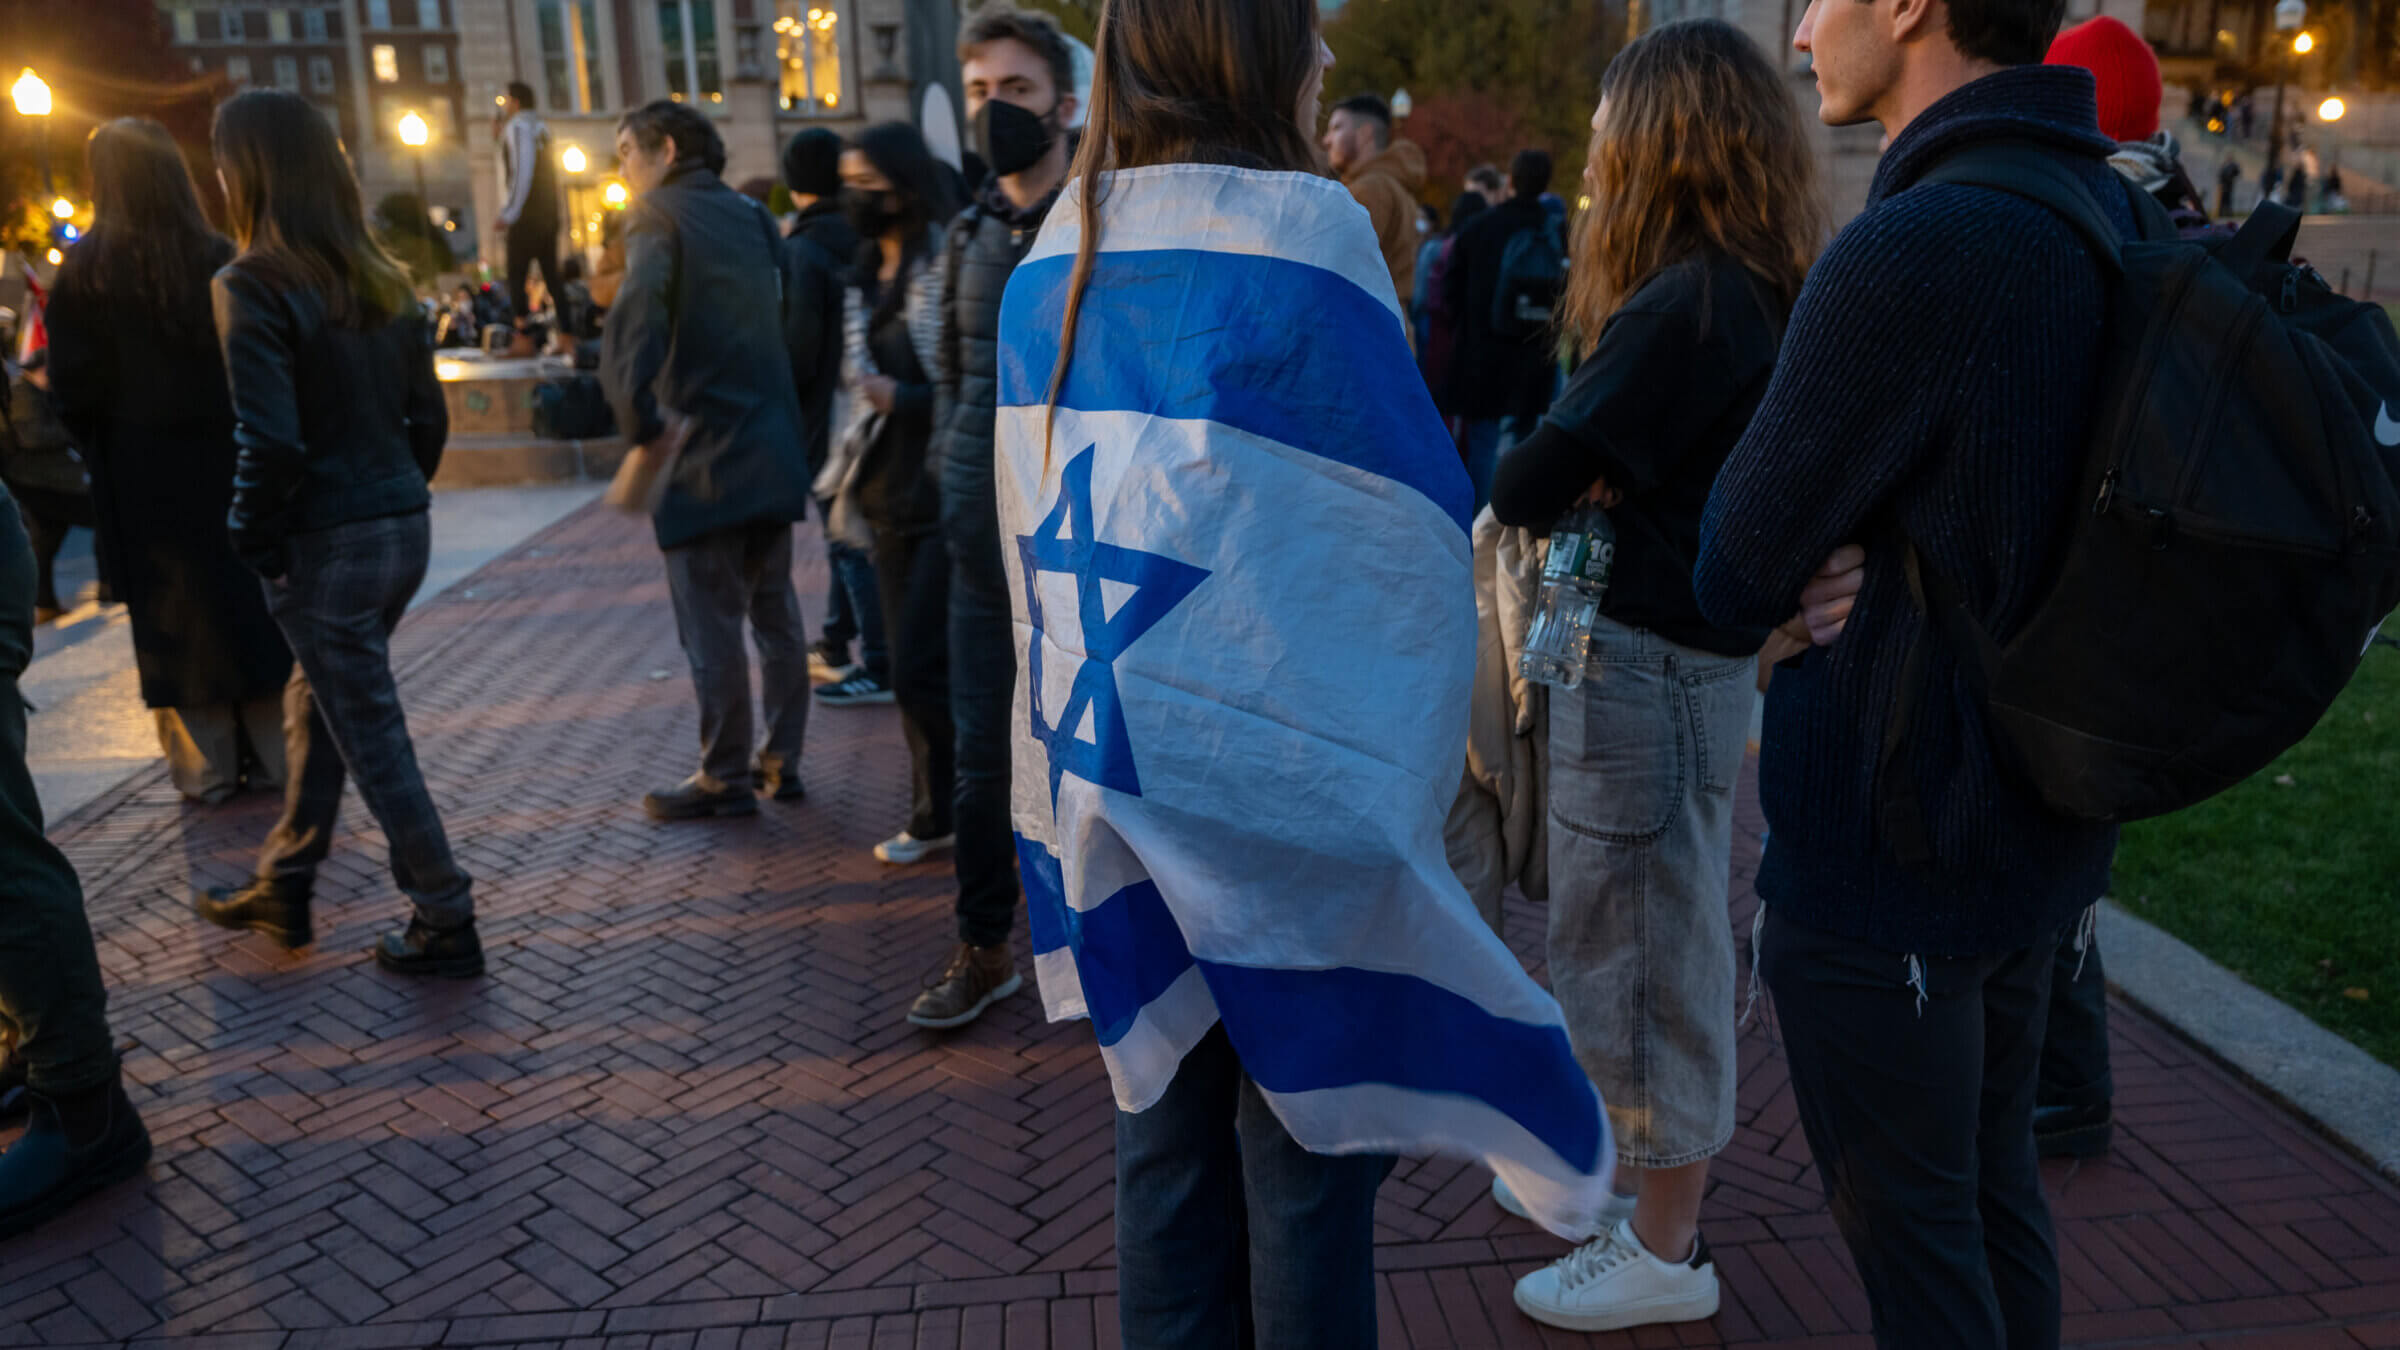 A student at Columbia University wraps herself in an Israeli flag during a fall protest.